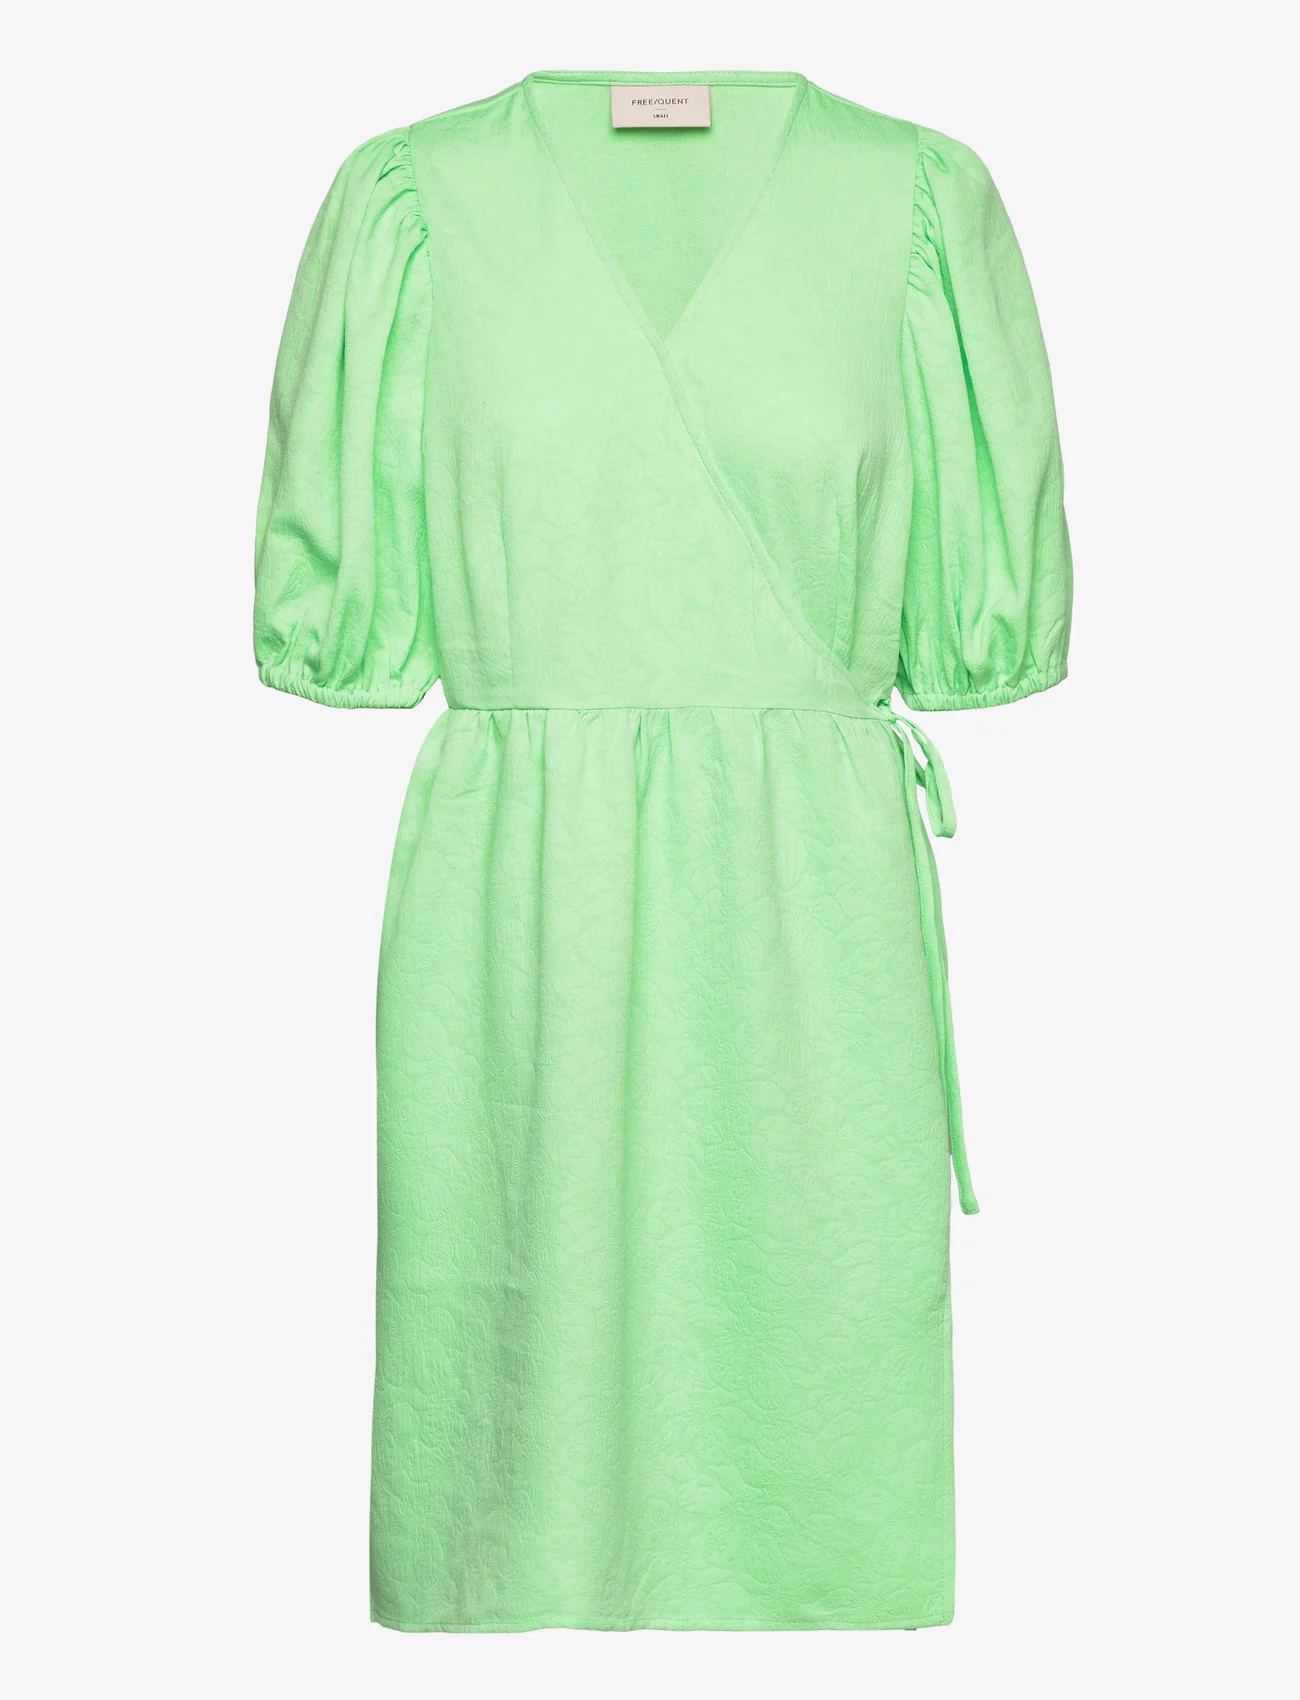 FREE/QUENT - FQSILEA-DRESS - party wear at outlet prices - summer green - 0